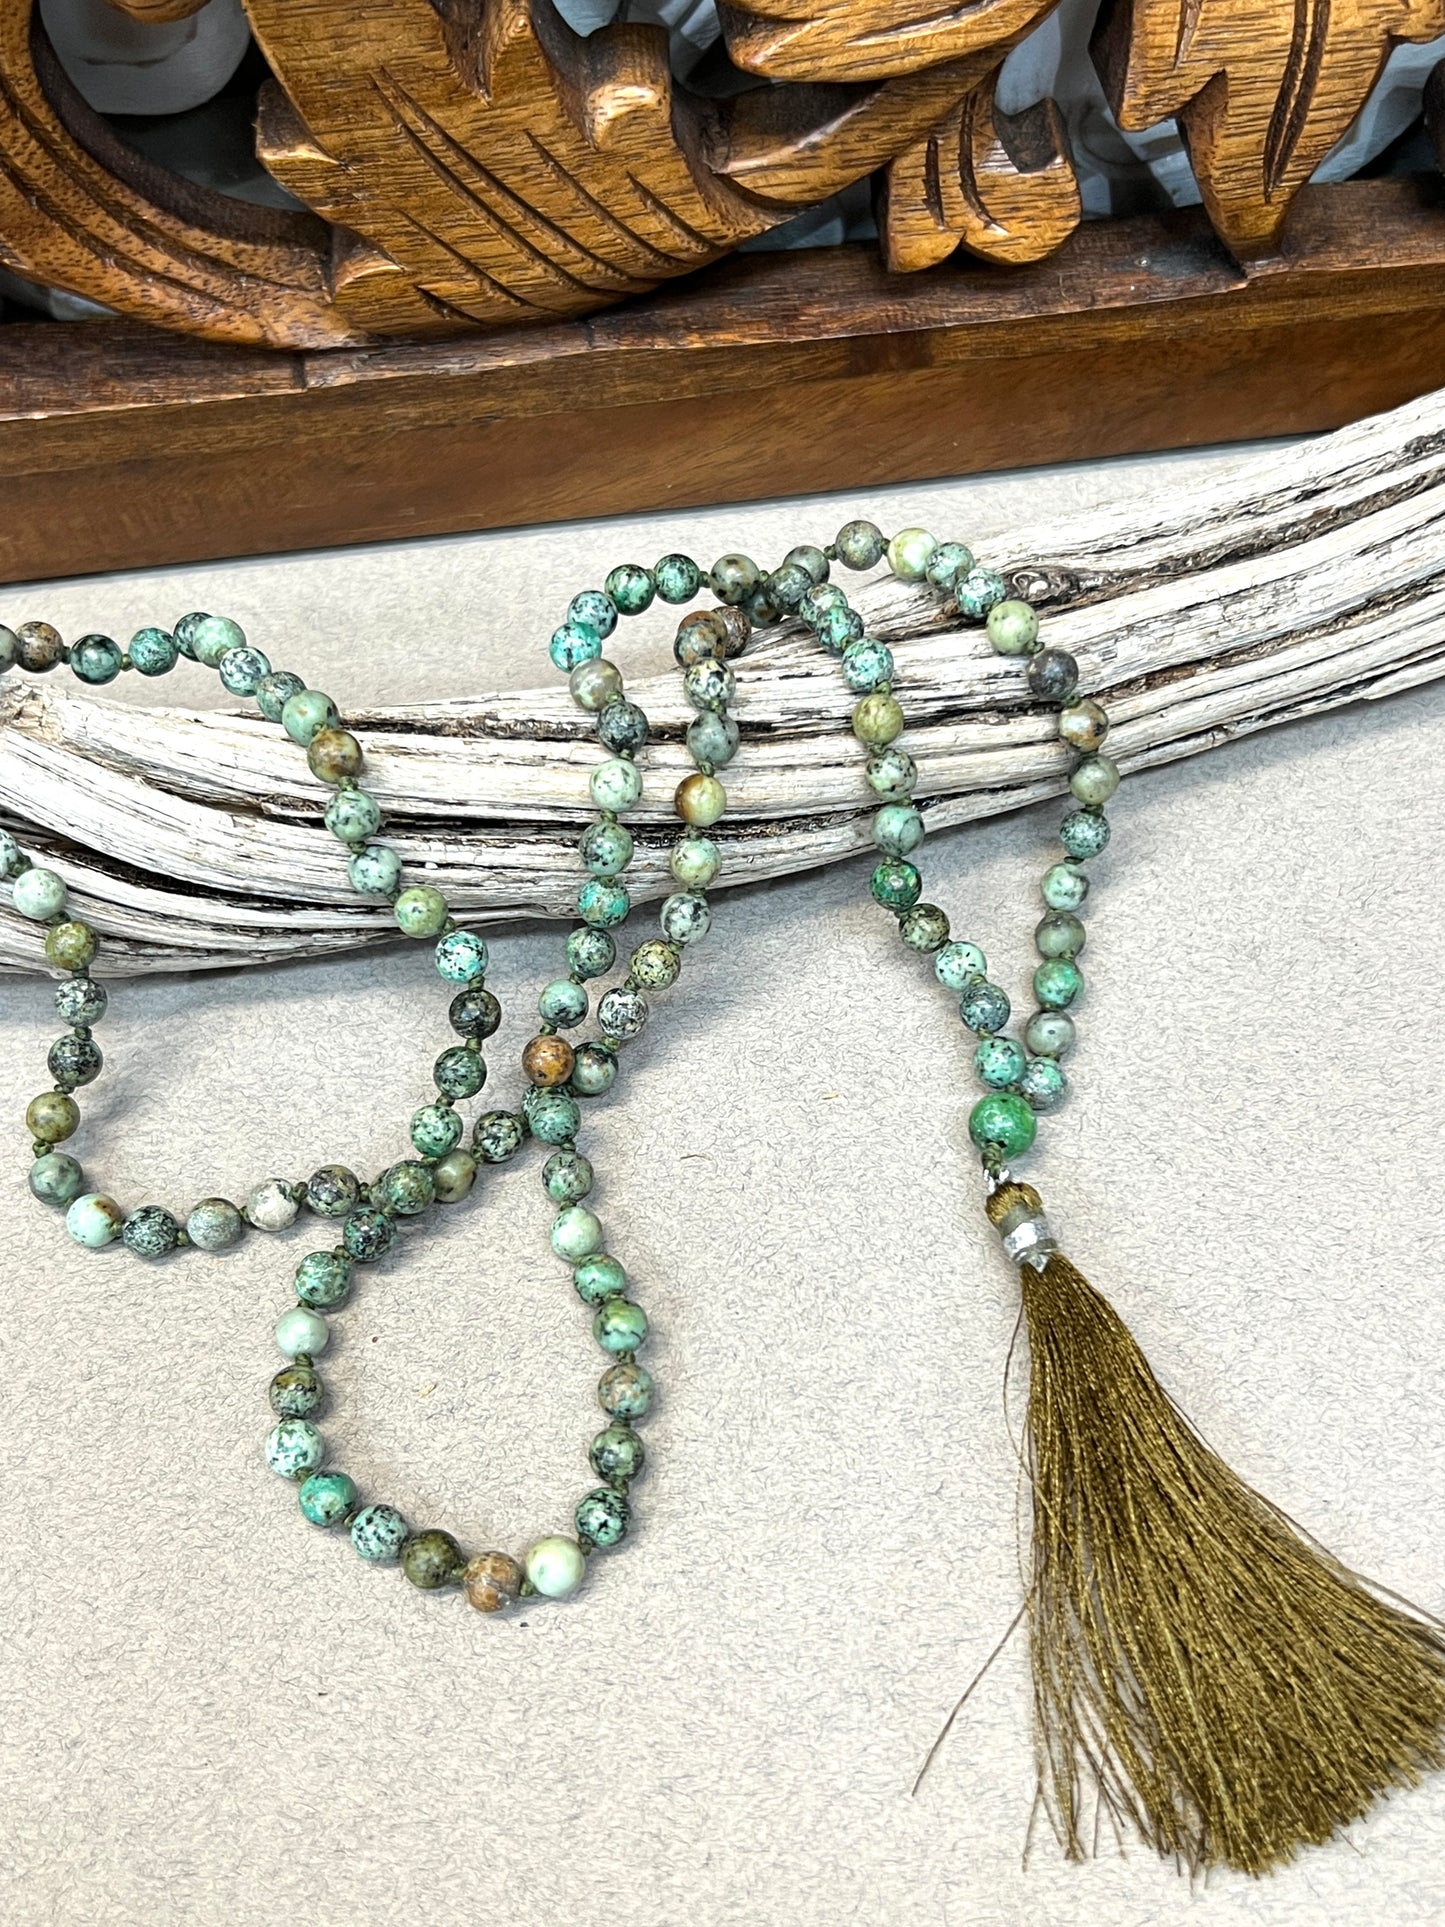 Hand knotted African Turquoise Mala Necklaces